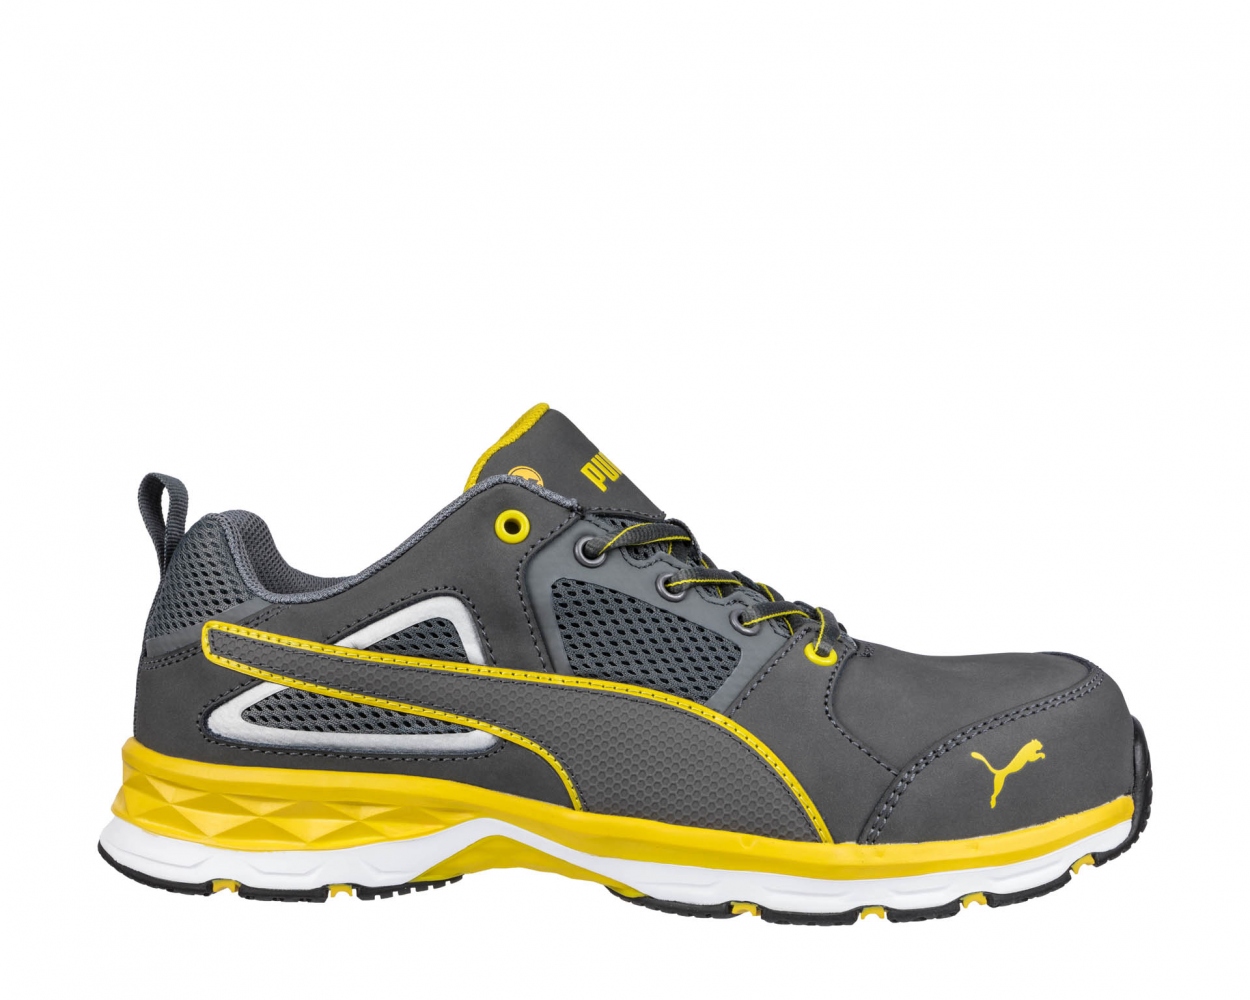 pics/Albatros/Safety Shoes/643800/puma-643800-pace-2-yellow-low-822-list.jpg